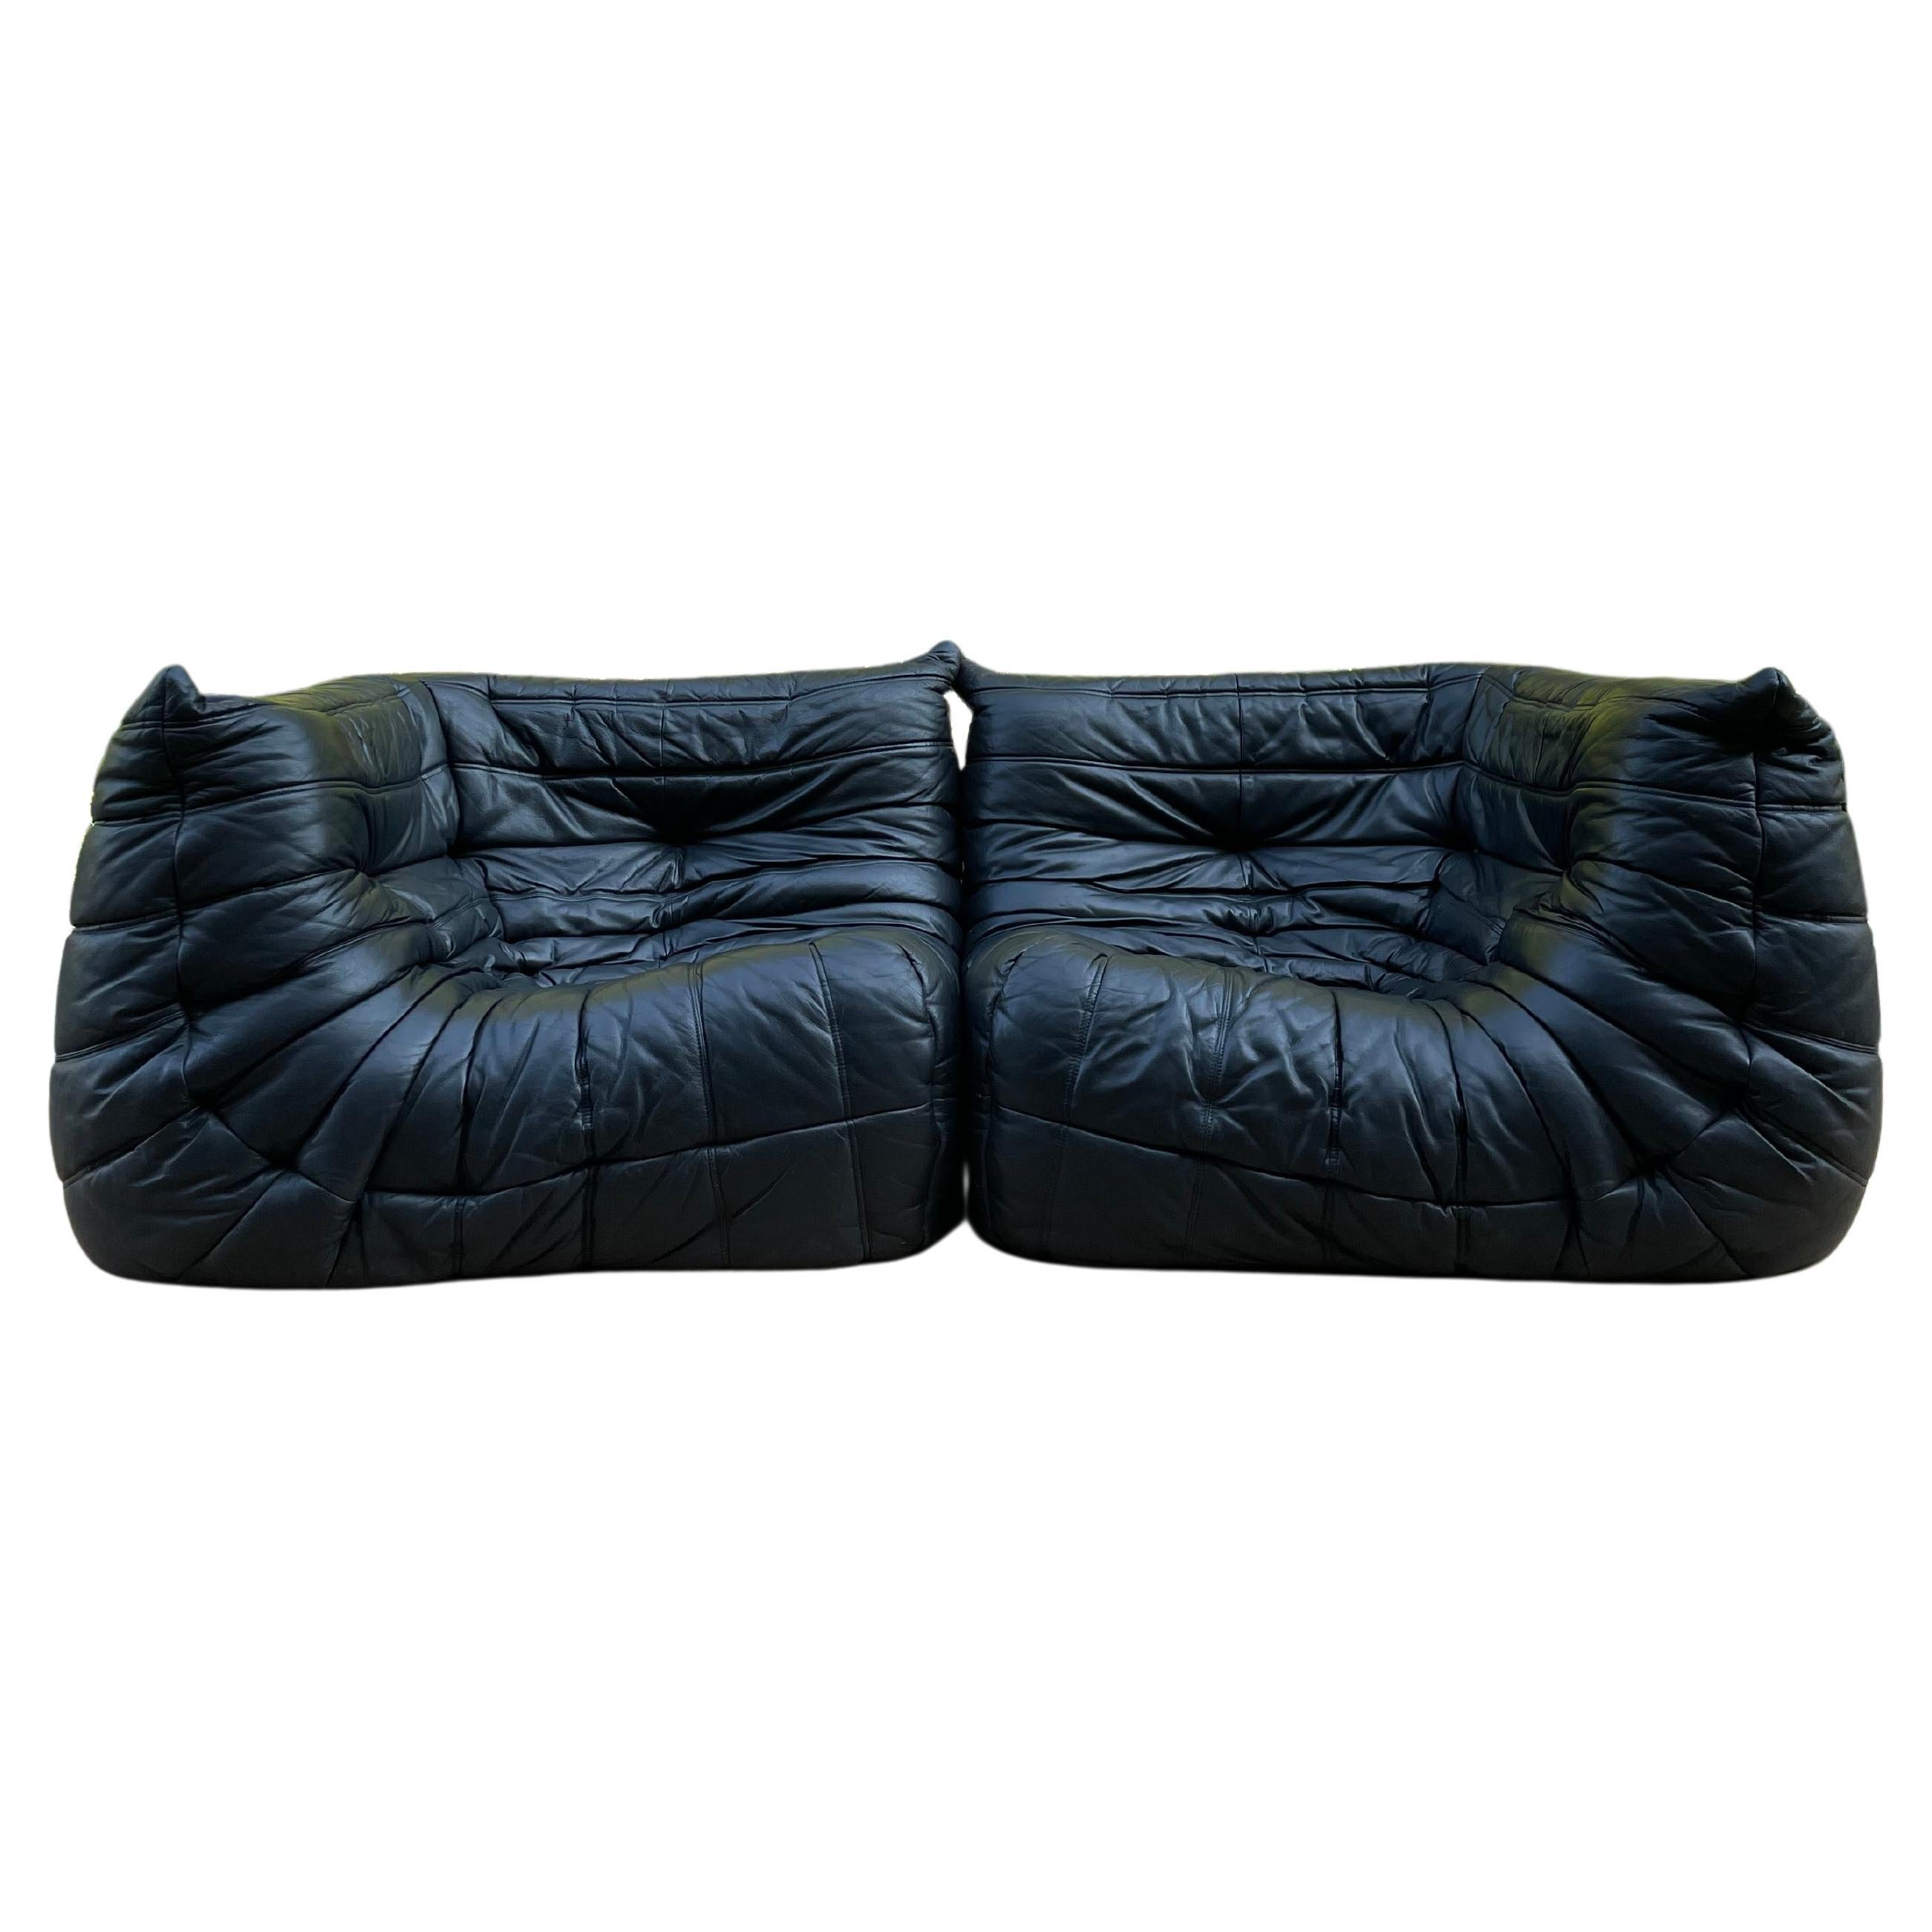 Pair of Corner Leather Togo Seats, Ligne Roset, Authentic Piece from the 1970s